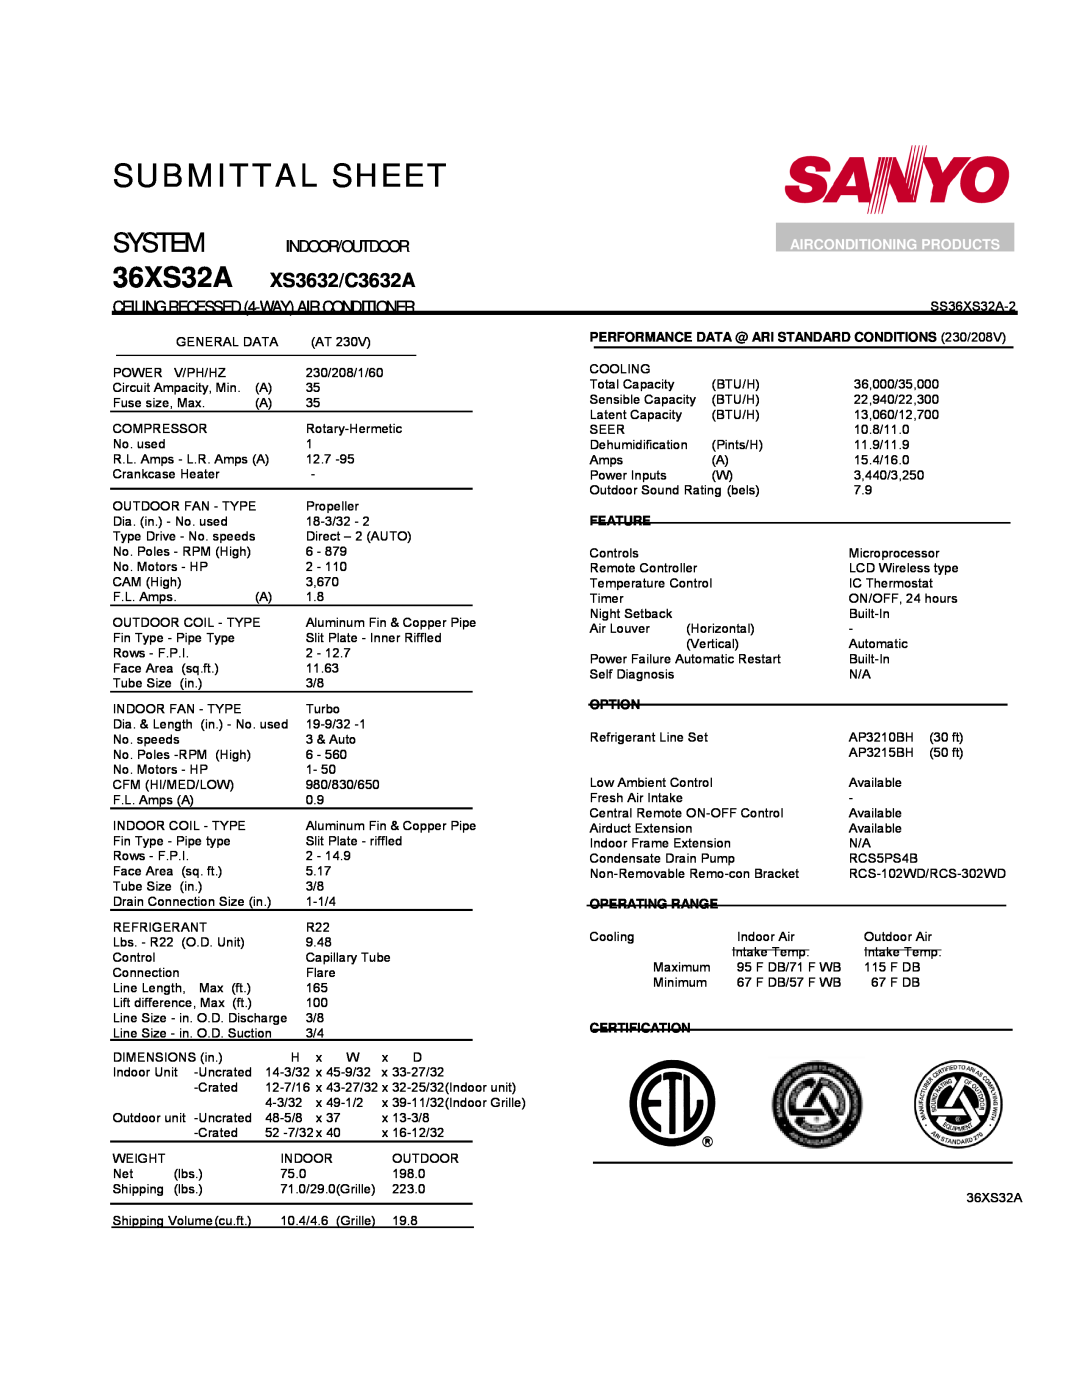 Sanyo 36XS32A dimensions Submittal Sheet, XS3632/C3632A, CEILING RECESSED 4-WAYAIR CONDITIONER, Airconditioning Products 